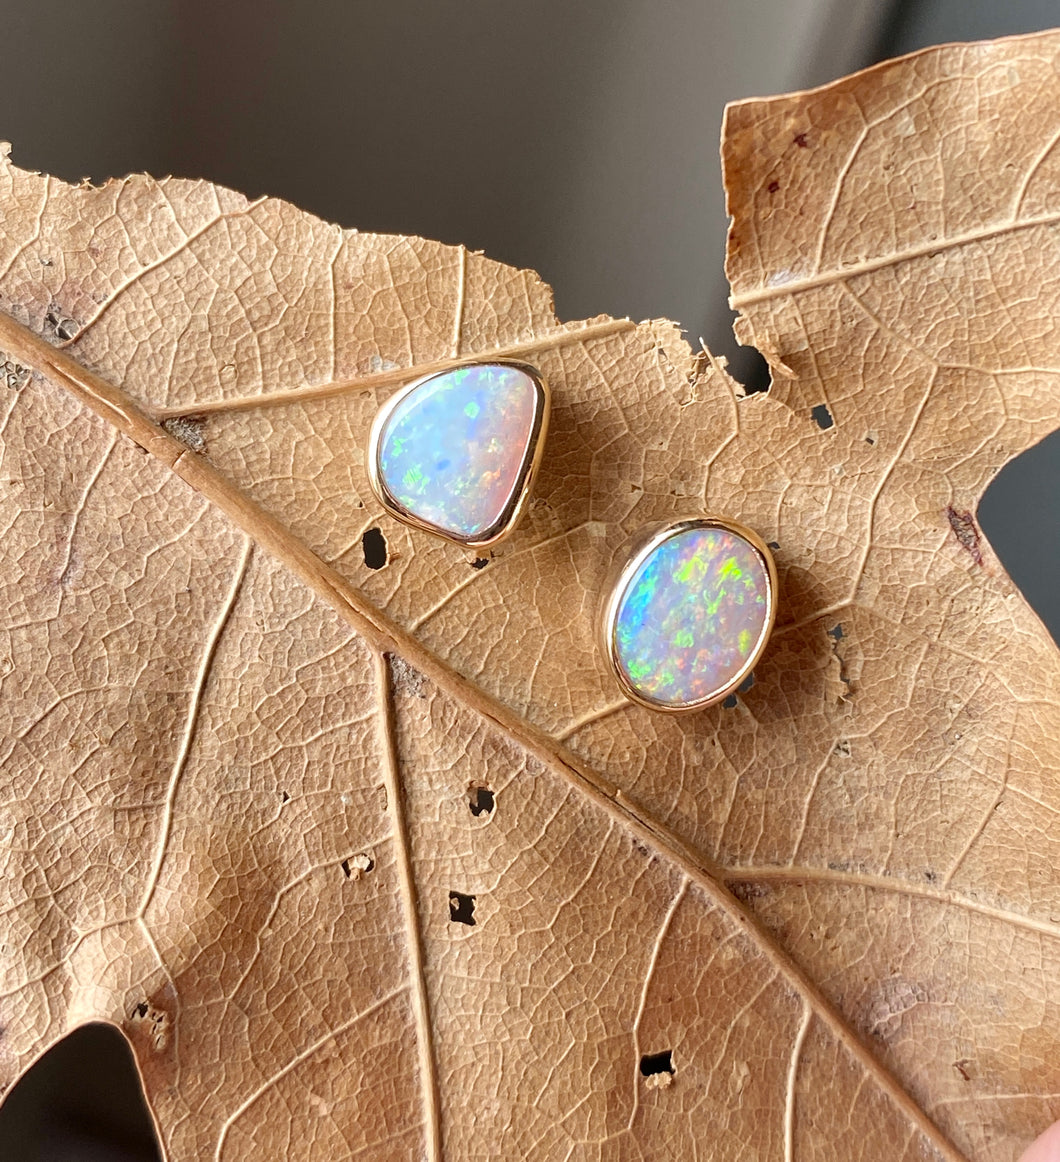 Gold and Silver Australian Opal Studs